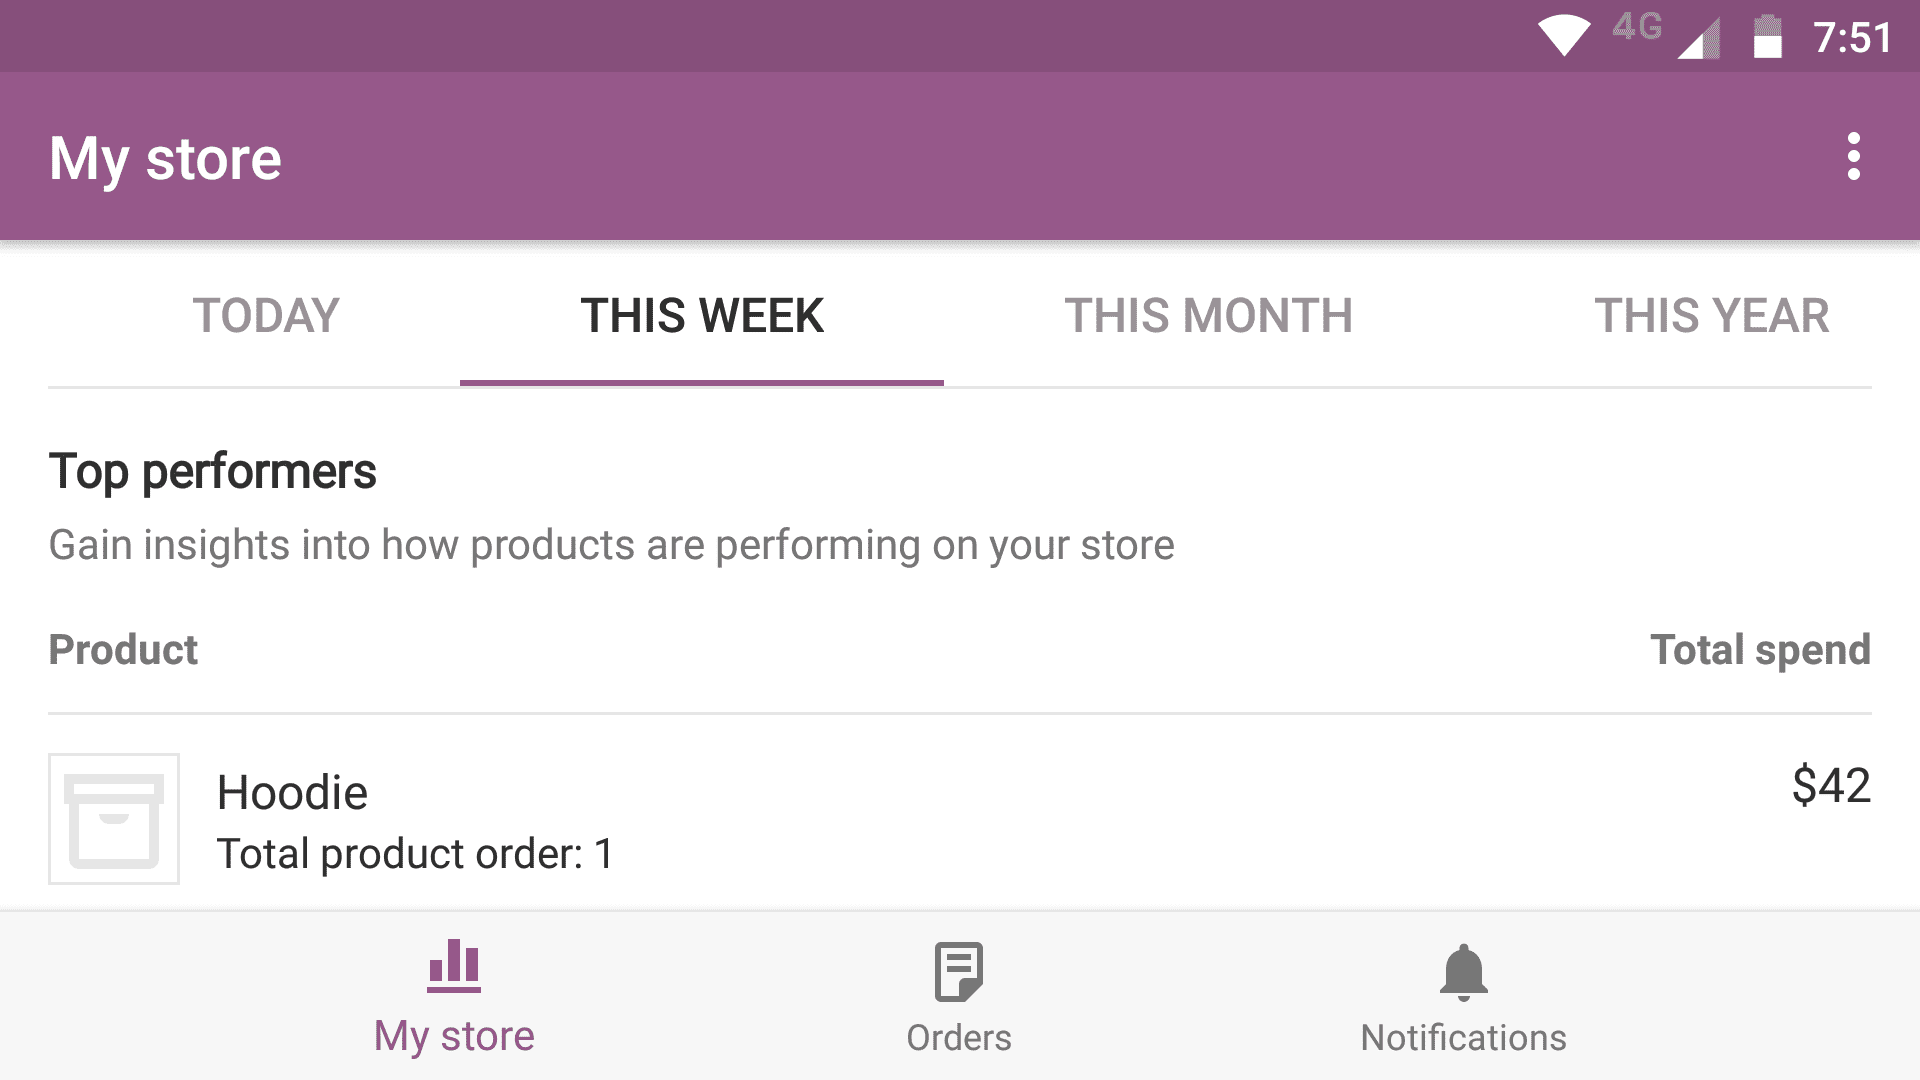 Our first order showing up on the app.